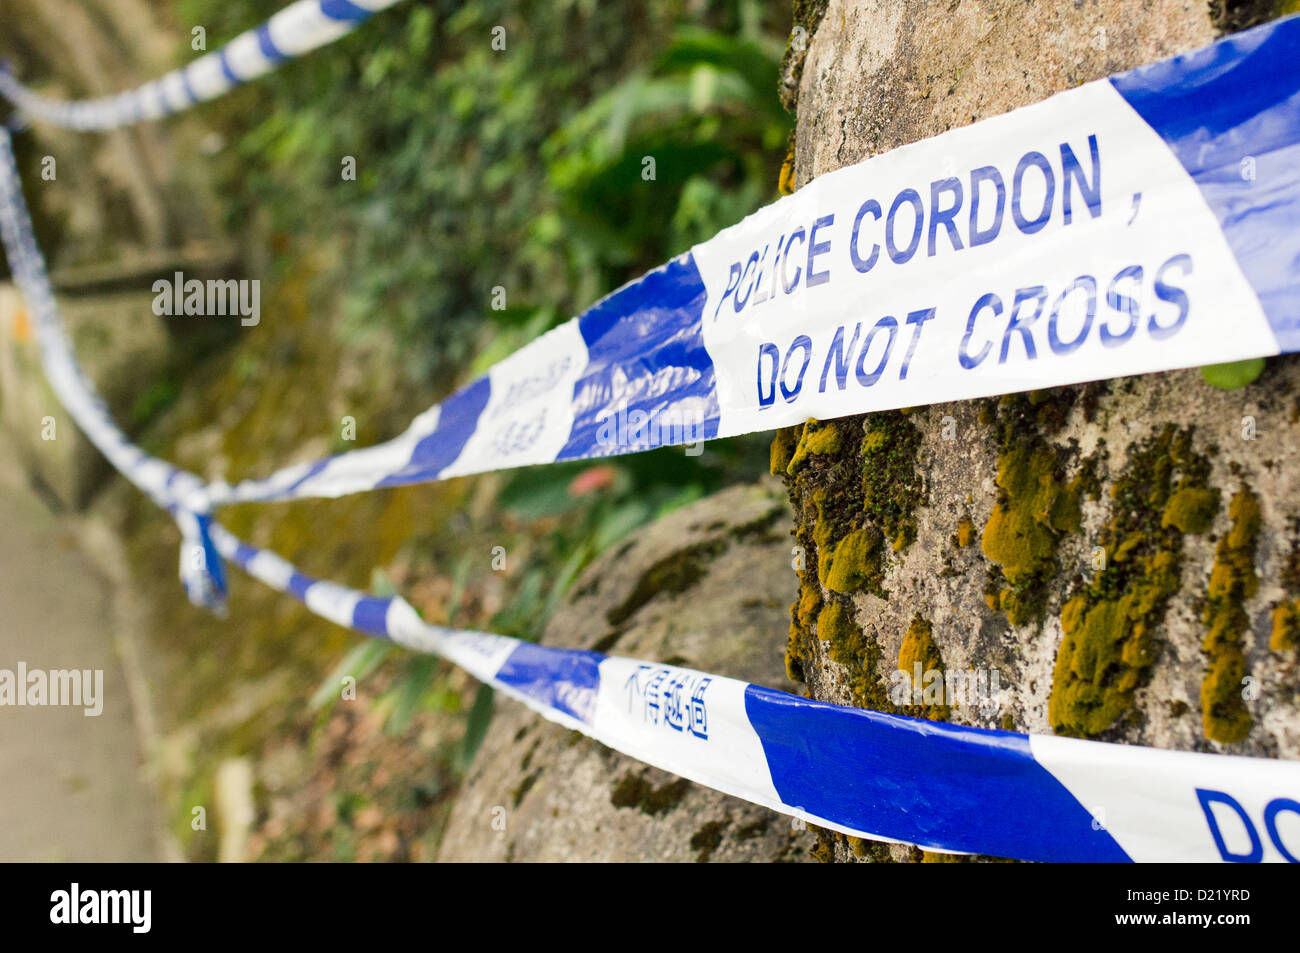 Police do not cross tape in an accident scene of land slide. Photo is taken at Hong Kong. Stock Photo